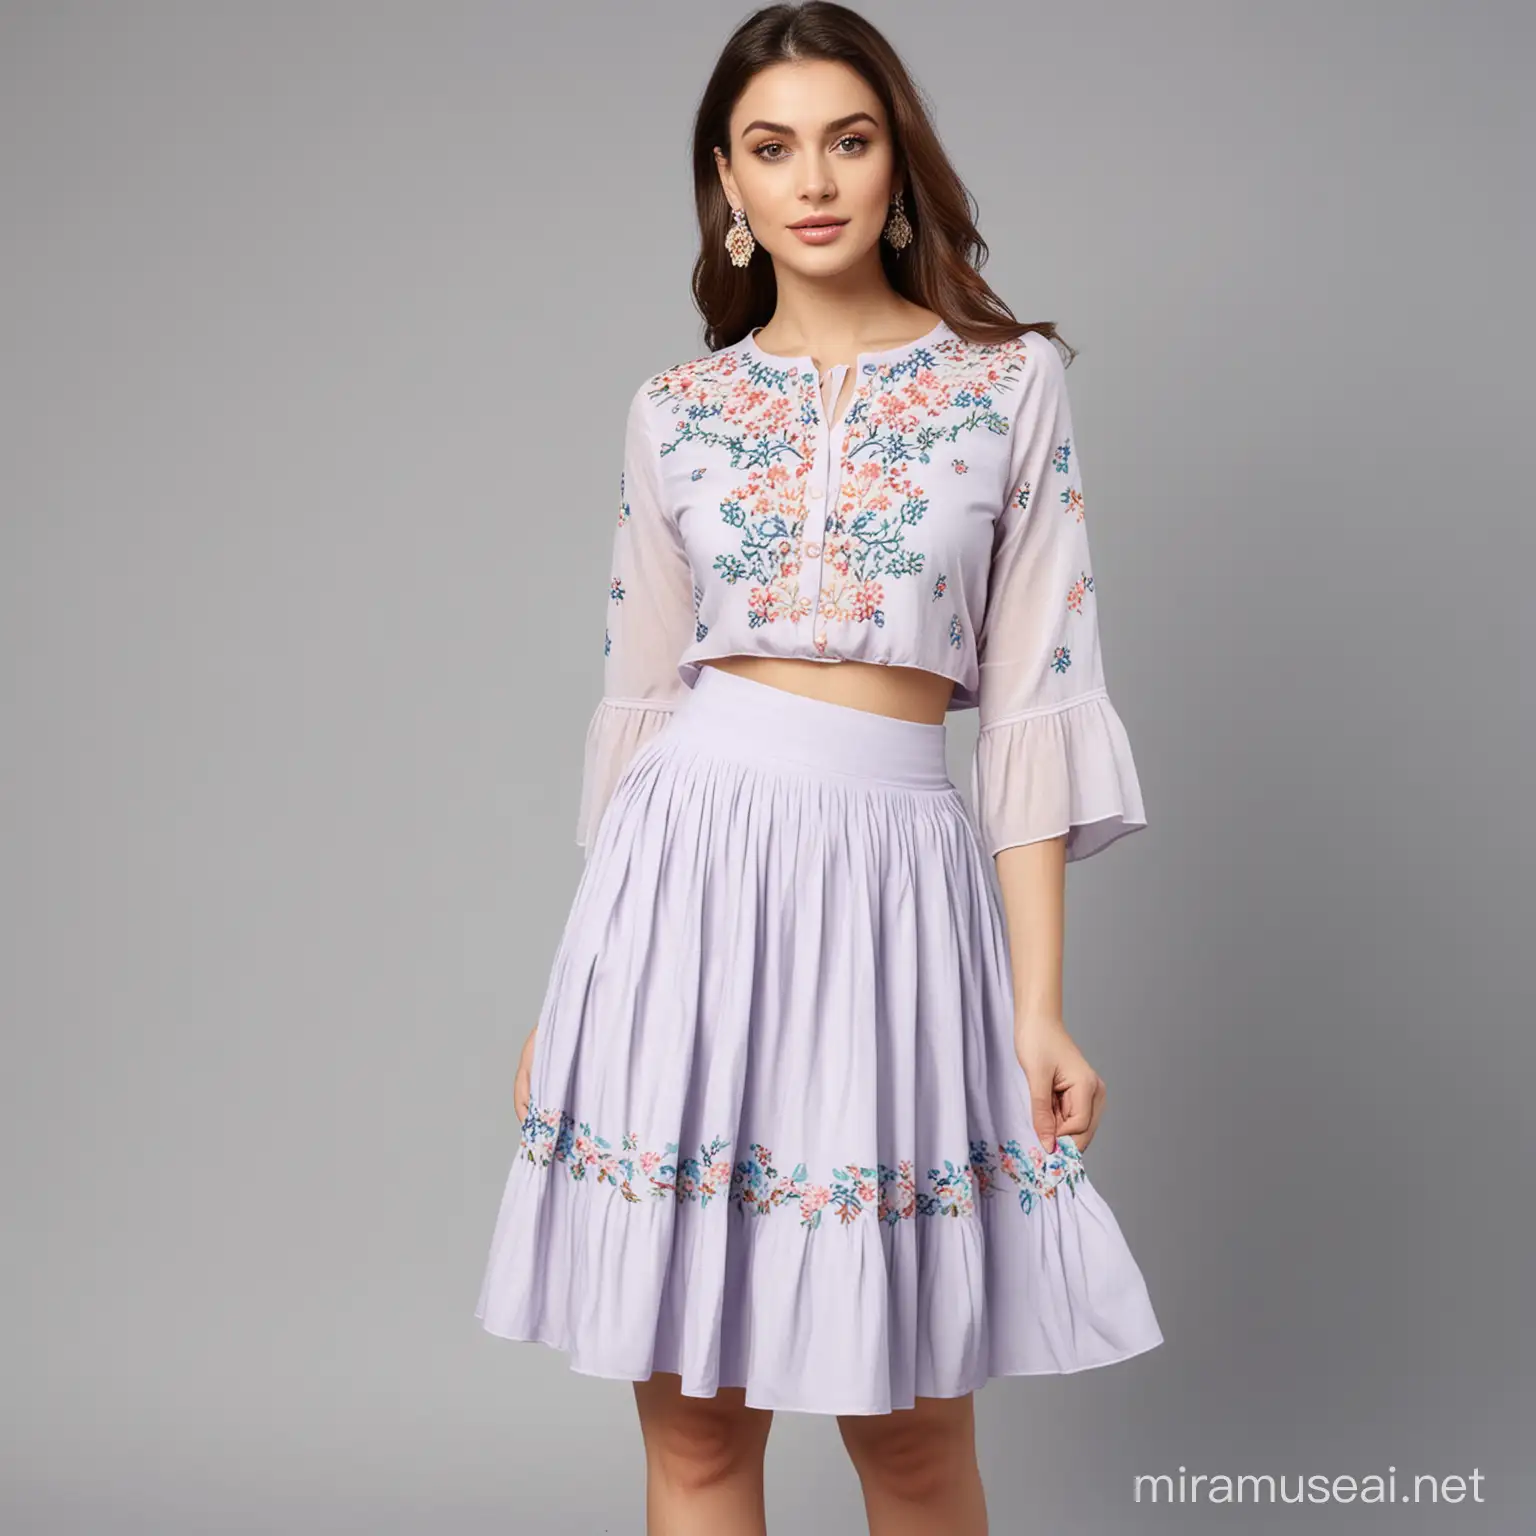 Pastel colour skirt and top for women with embroidery design 